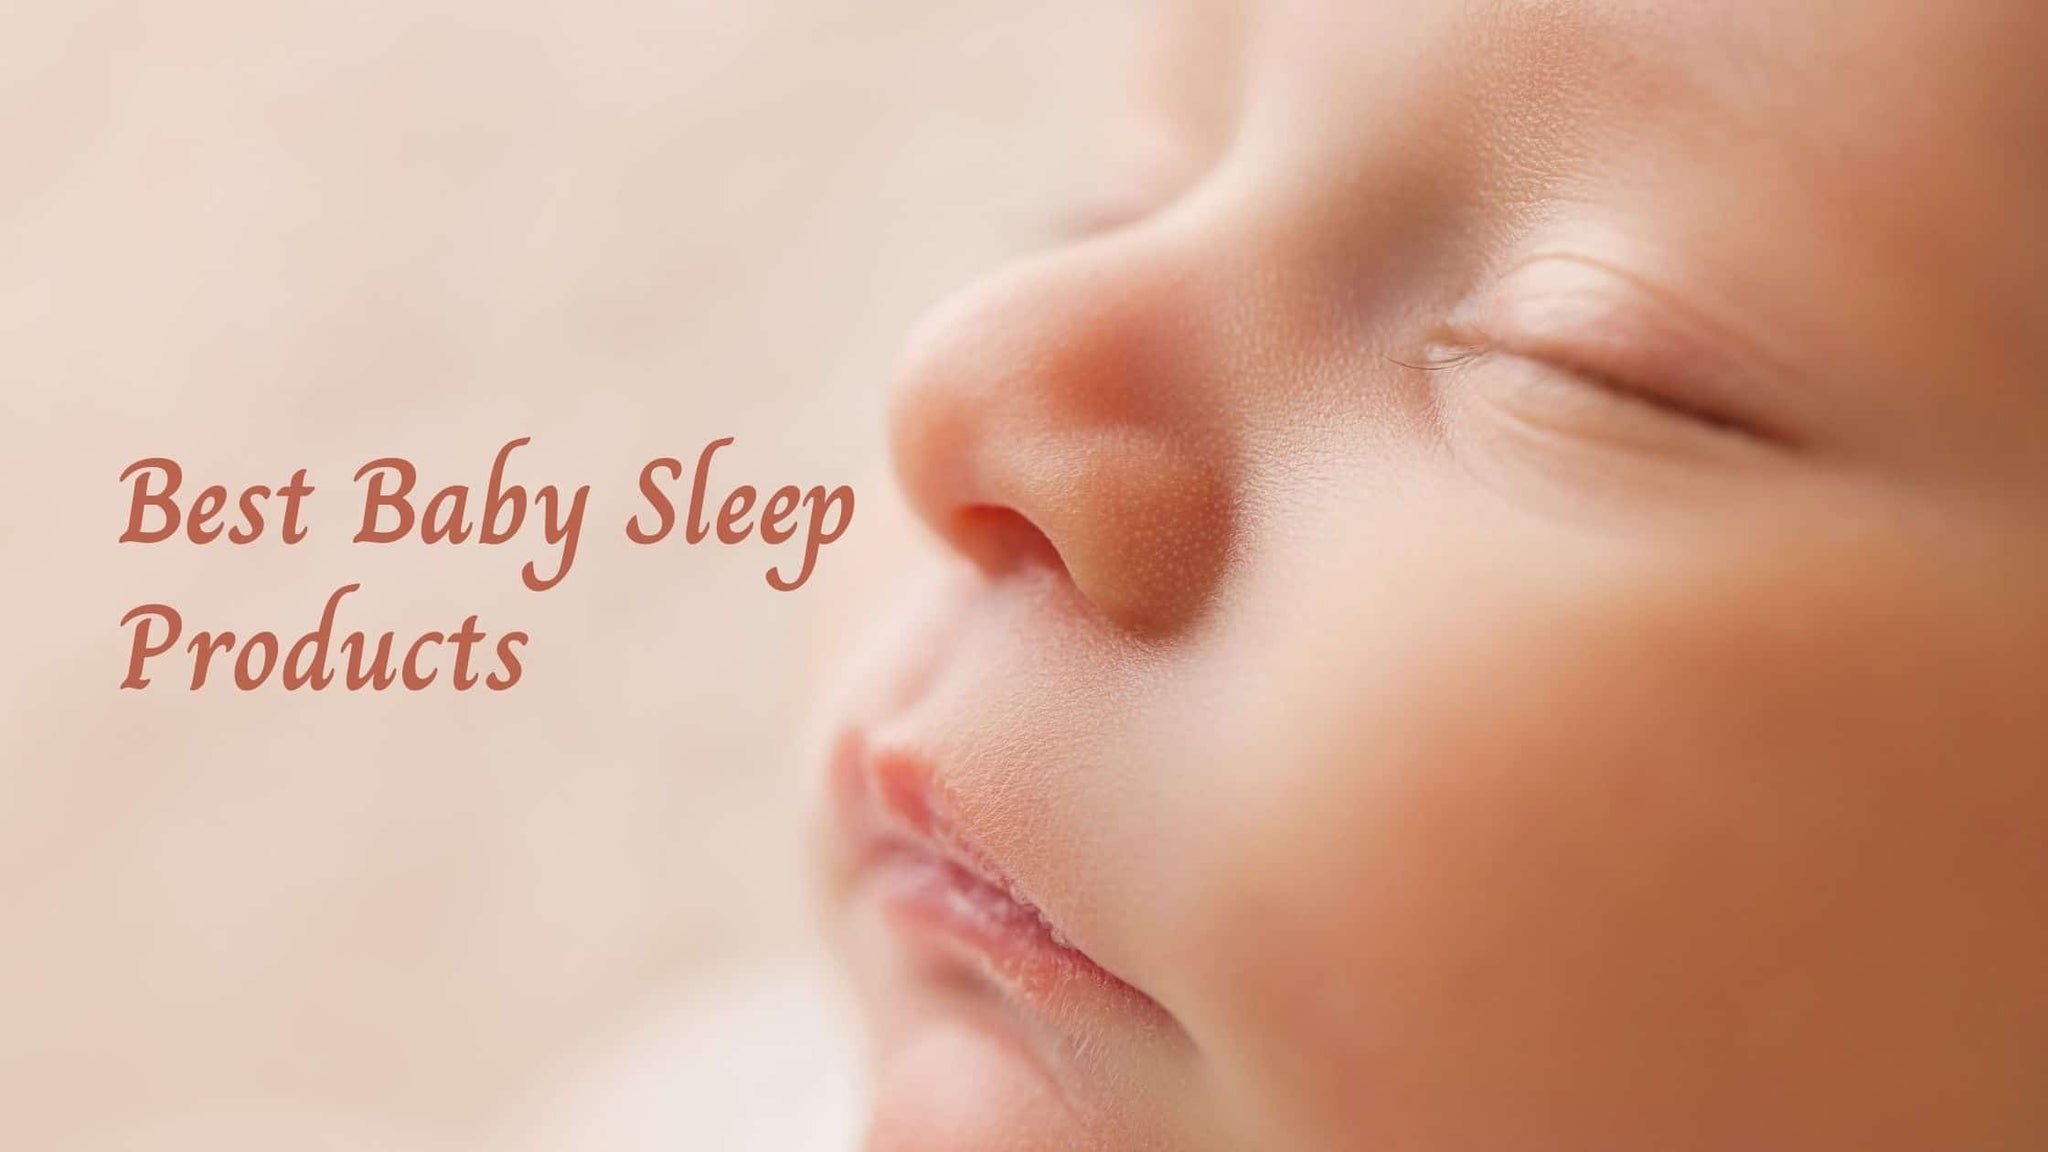 Types of Baby Sleep Products 2022 | That Will Help Your Baby Sleep Without Any Fuss